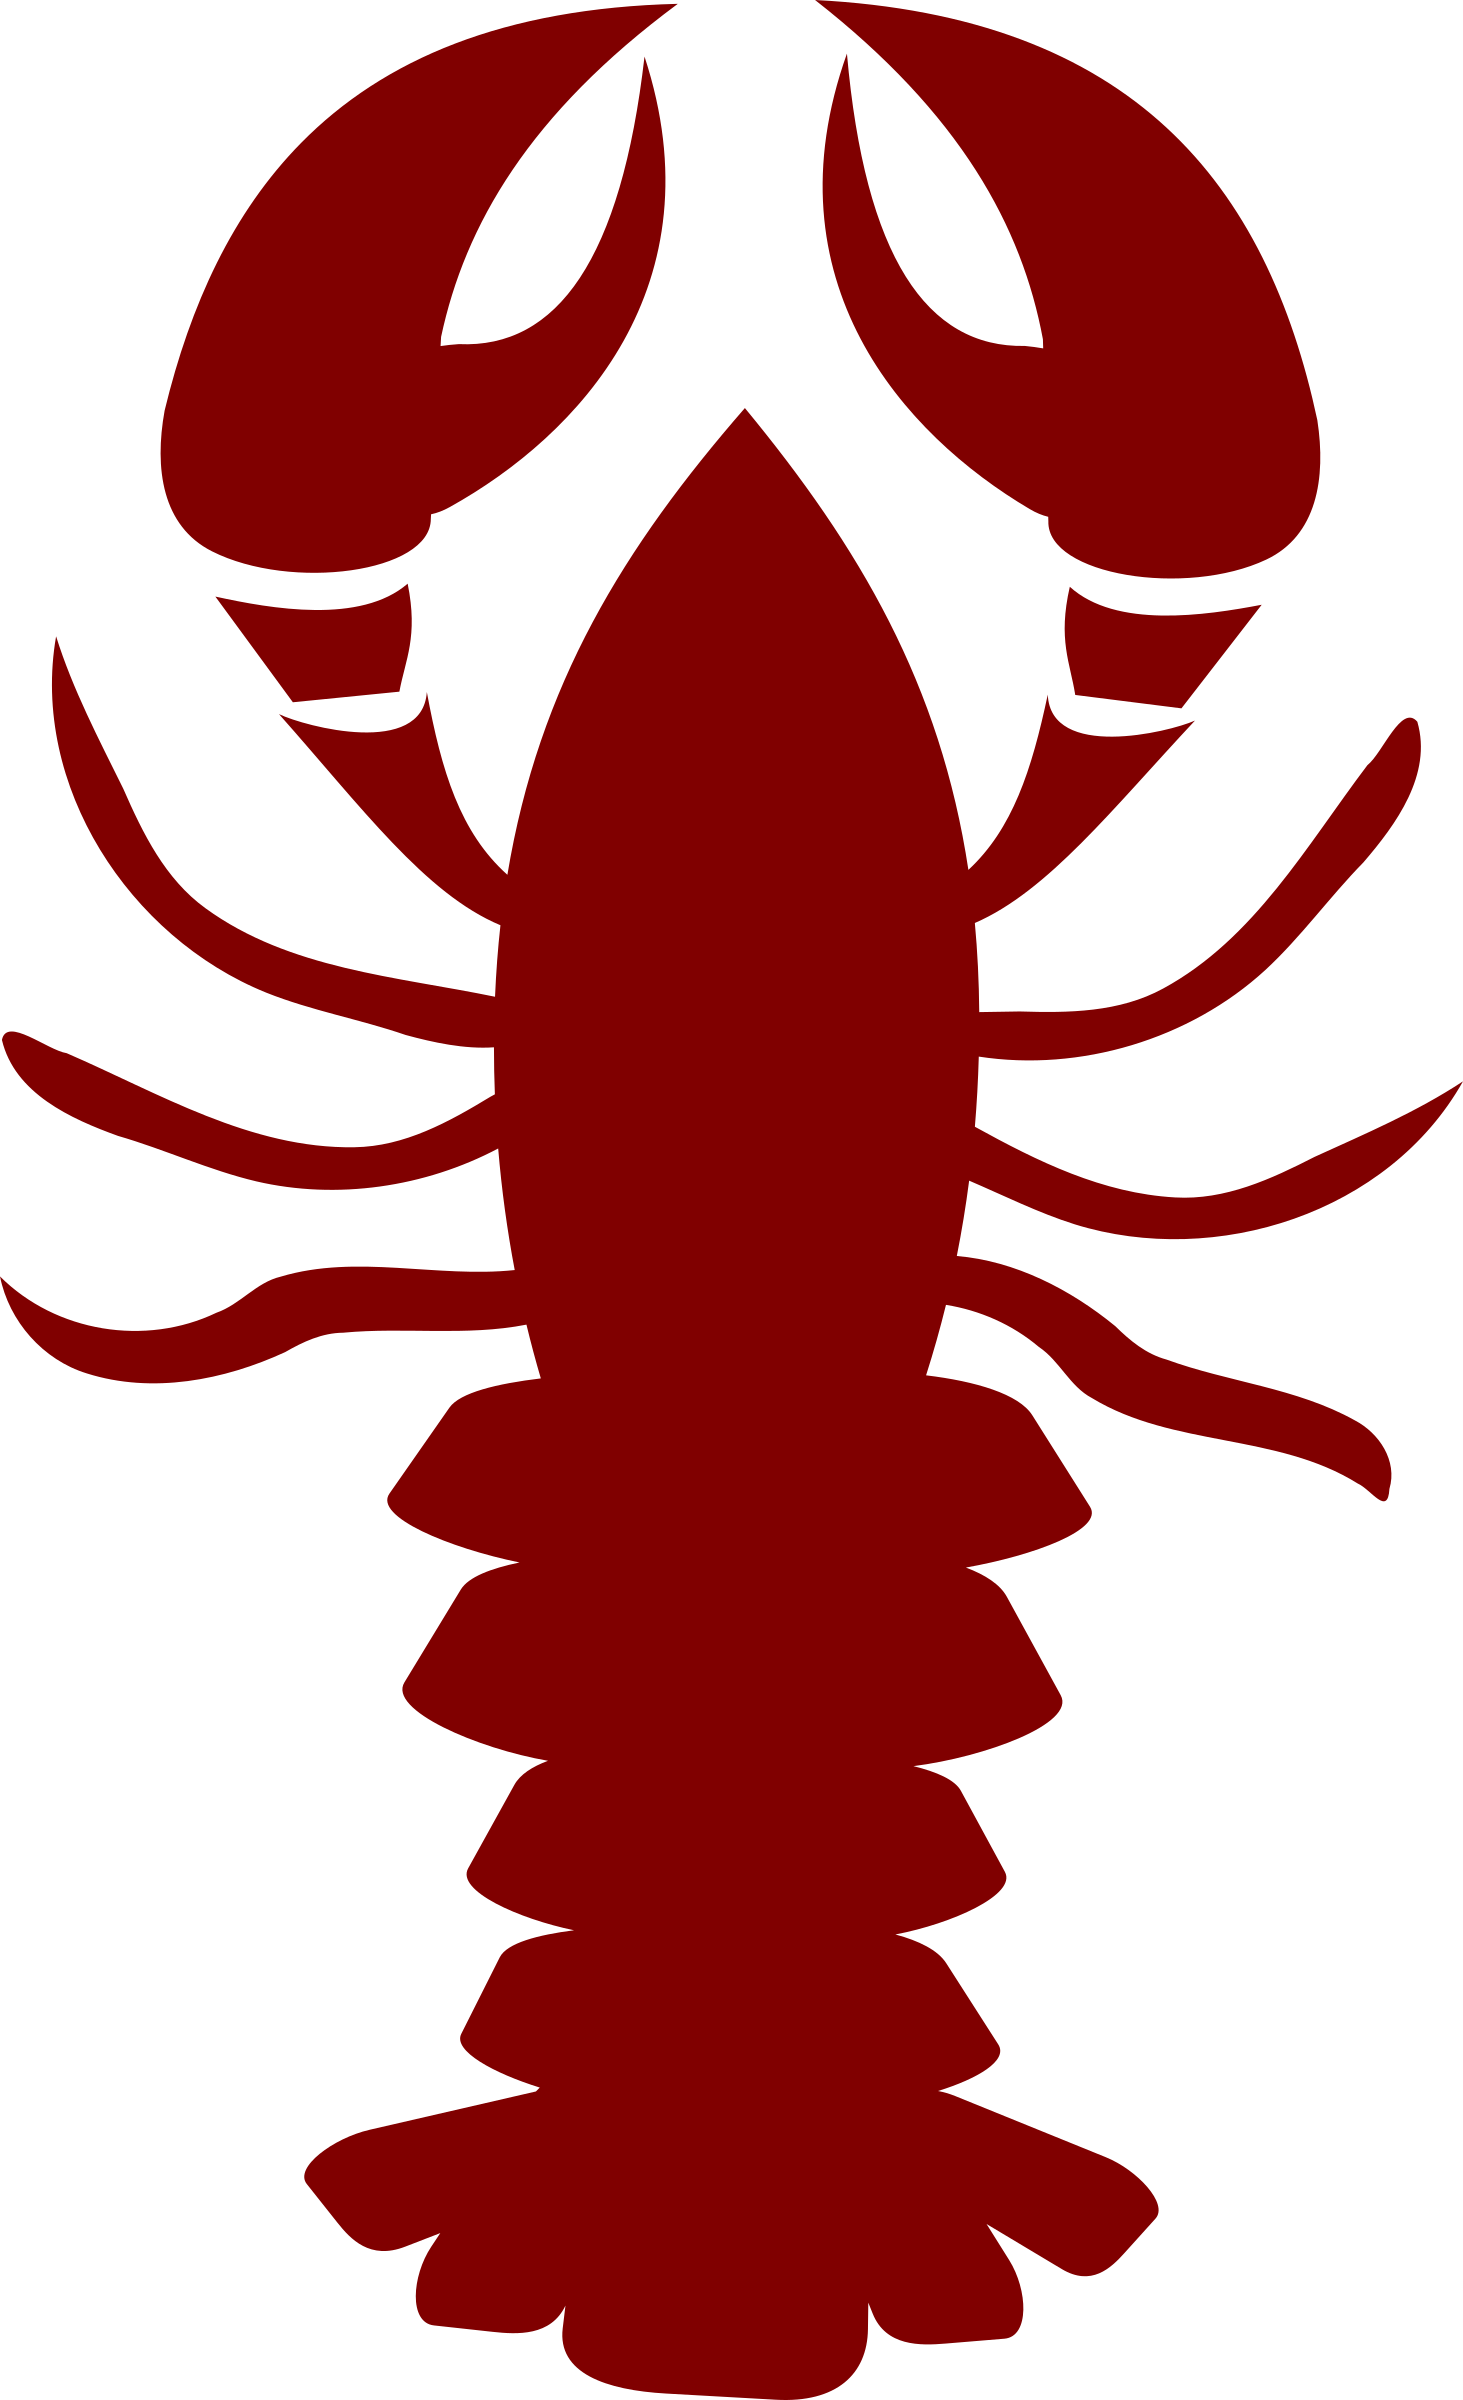 Download Lobster clipart icon, Lobster icon Transparent FREE for ...